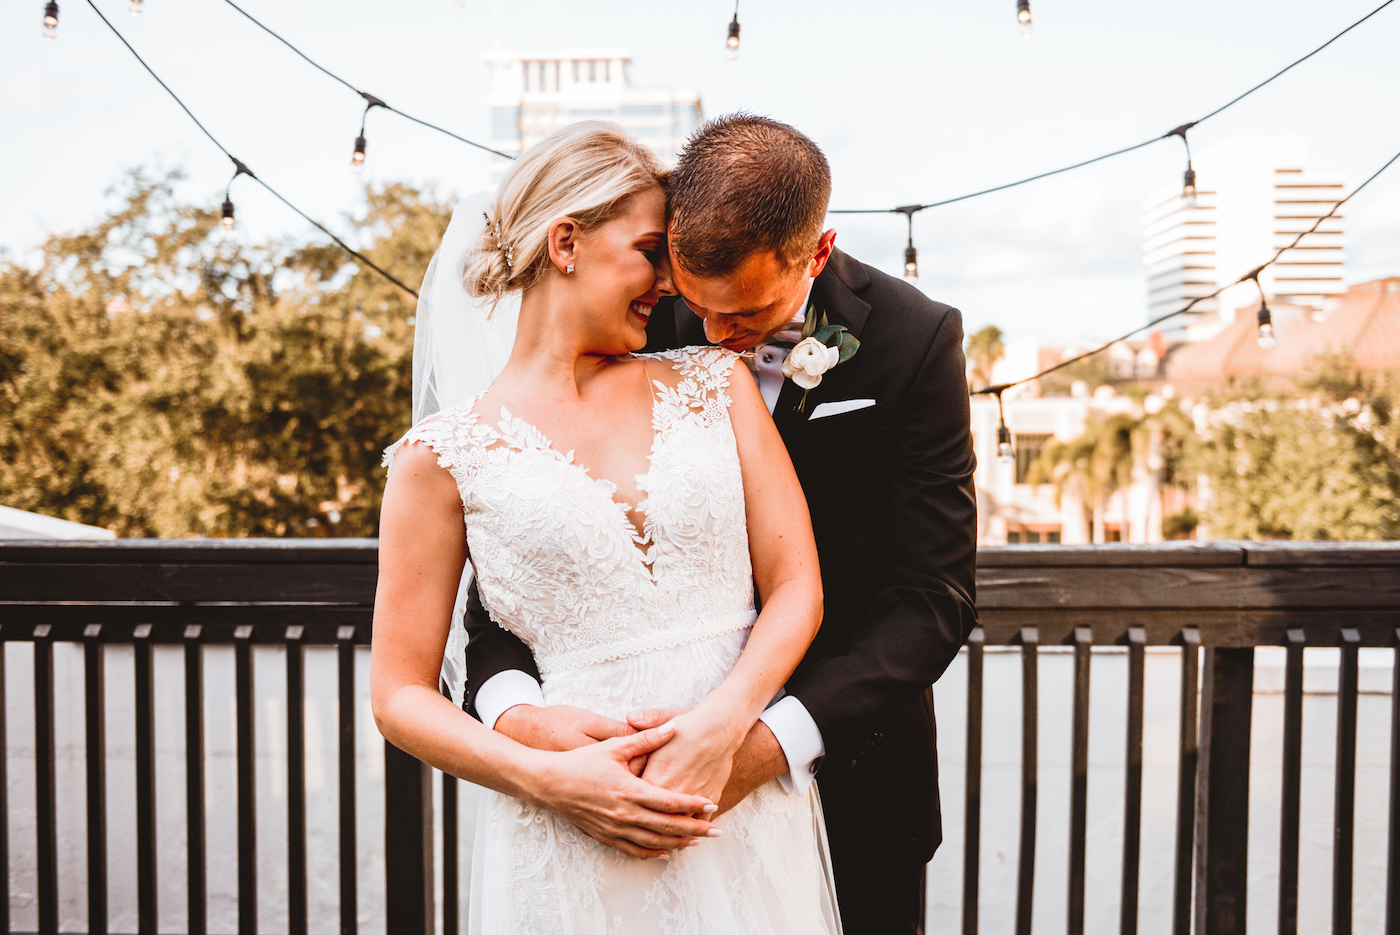 Bride and Groom Outdoor Downtown St. Pete Wedding Portraits | Ivory Morilee Lace and Tulle A Line Bridal Gown with Illusion Lace Cap Sleeve and Cathedral Veil | Groom in Classic Black Tuxedo Suit